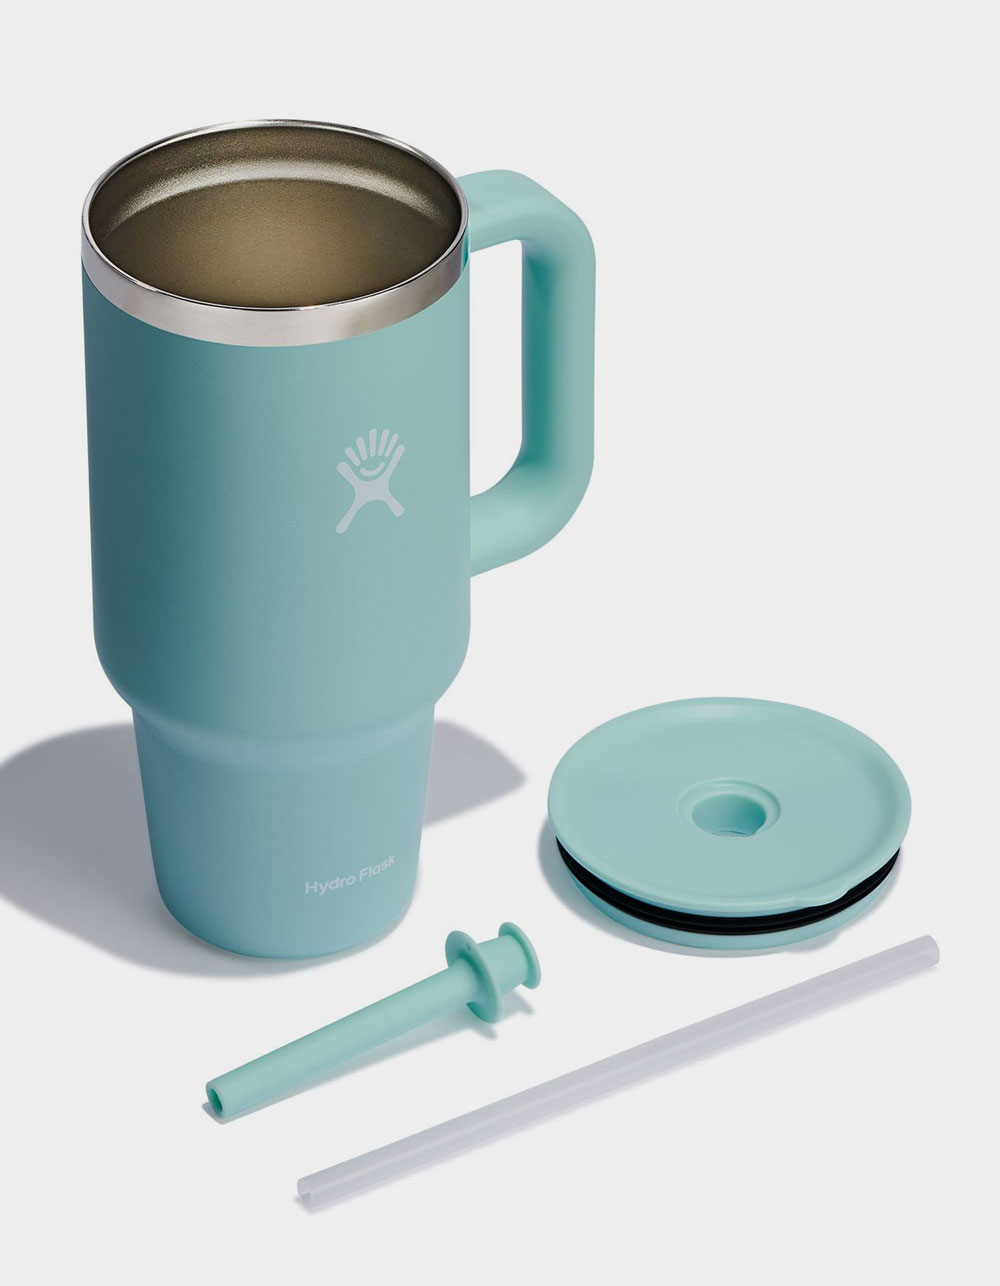 Hydroflask Boeing Coffee Tumbler – The Boeing Store